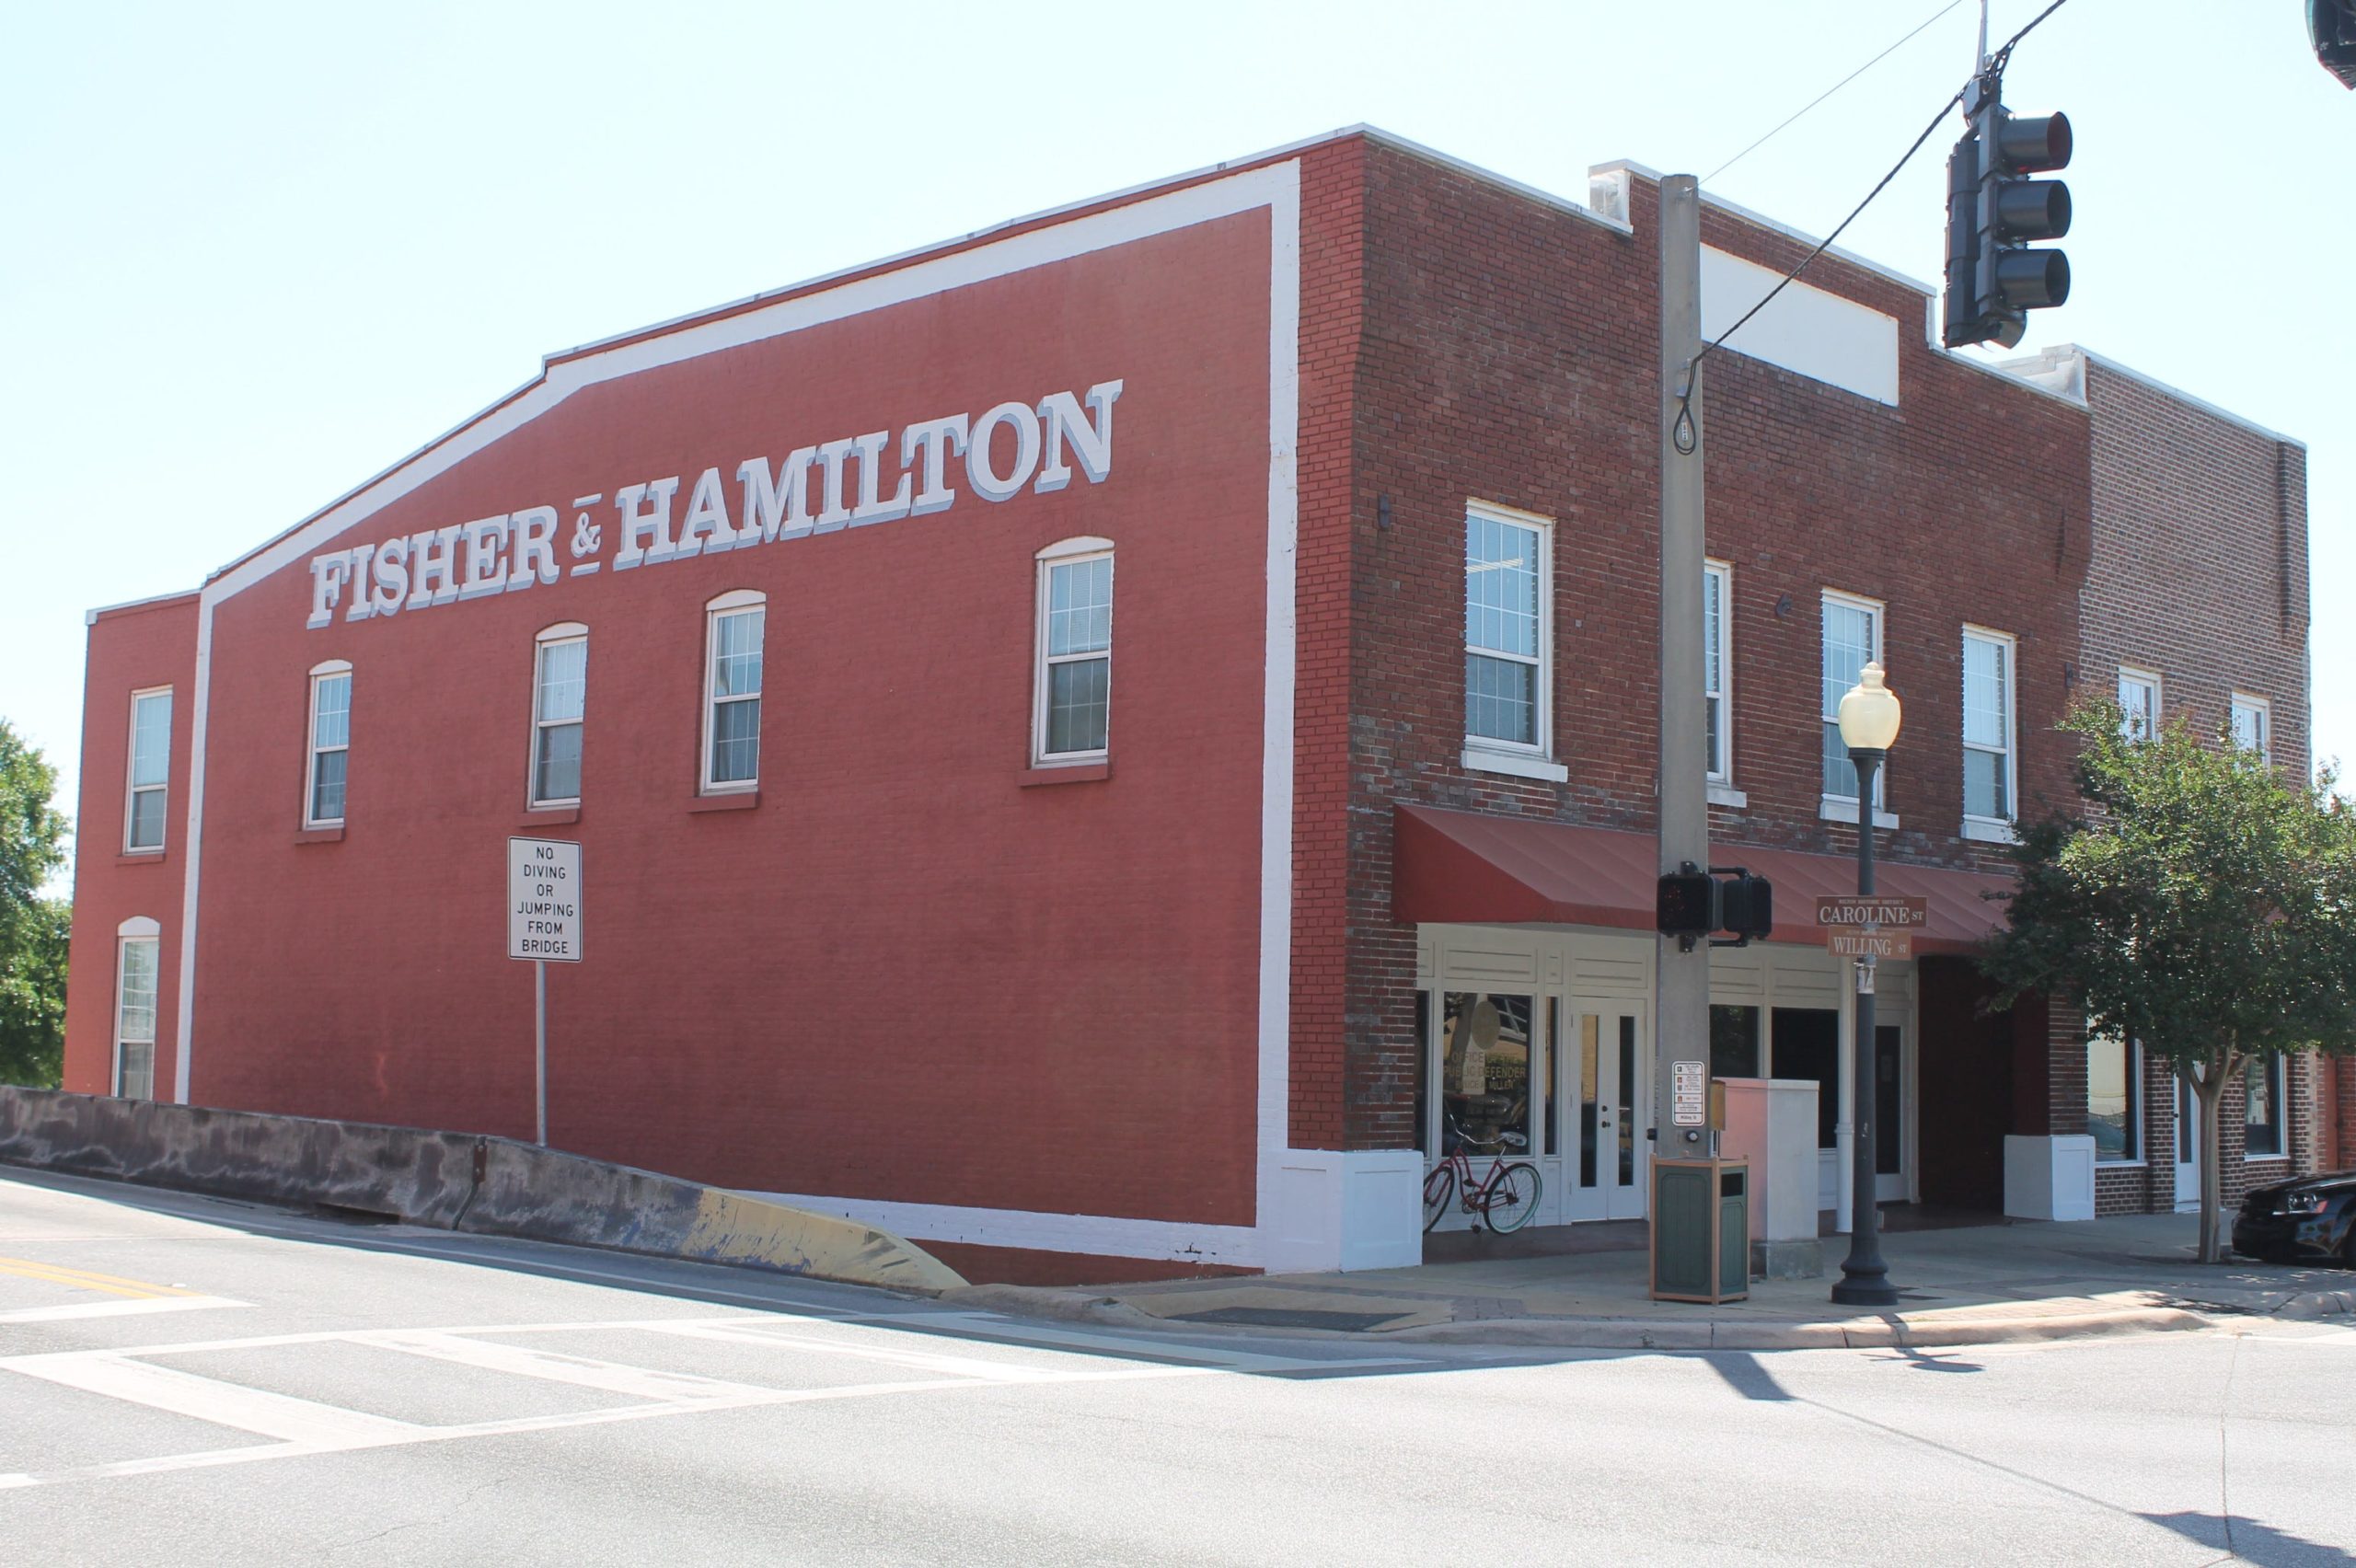 The Fisher Hamilton building at the corner of Willing Street and Highway 90 in downtown Milton is a hot topic within the discussions of the Board of County Commissioners about the courthouse decision and the possible widening of Highway 90.